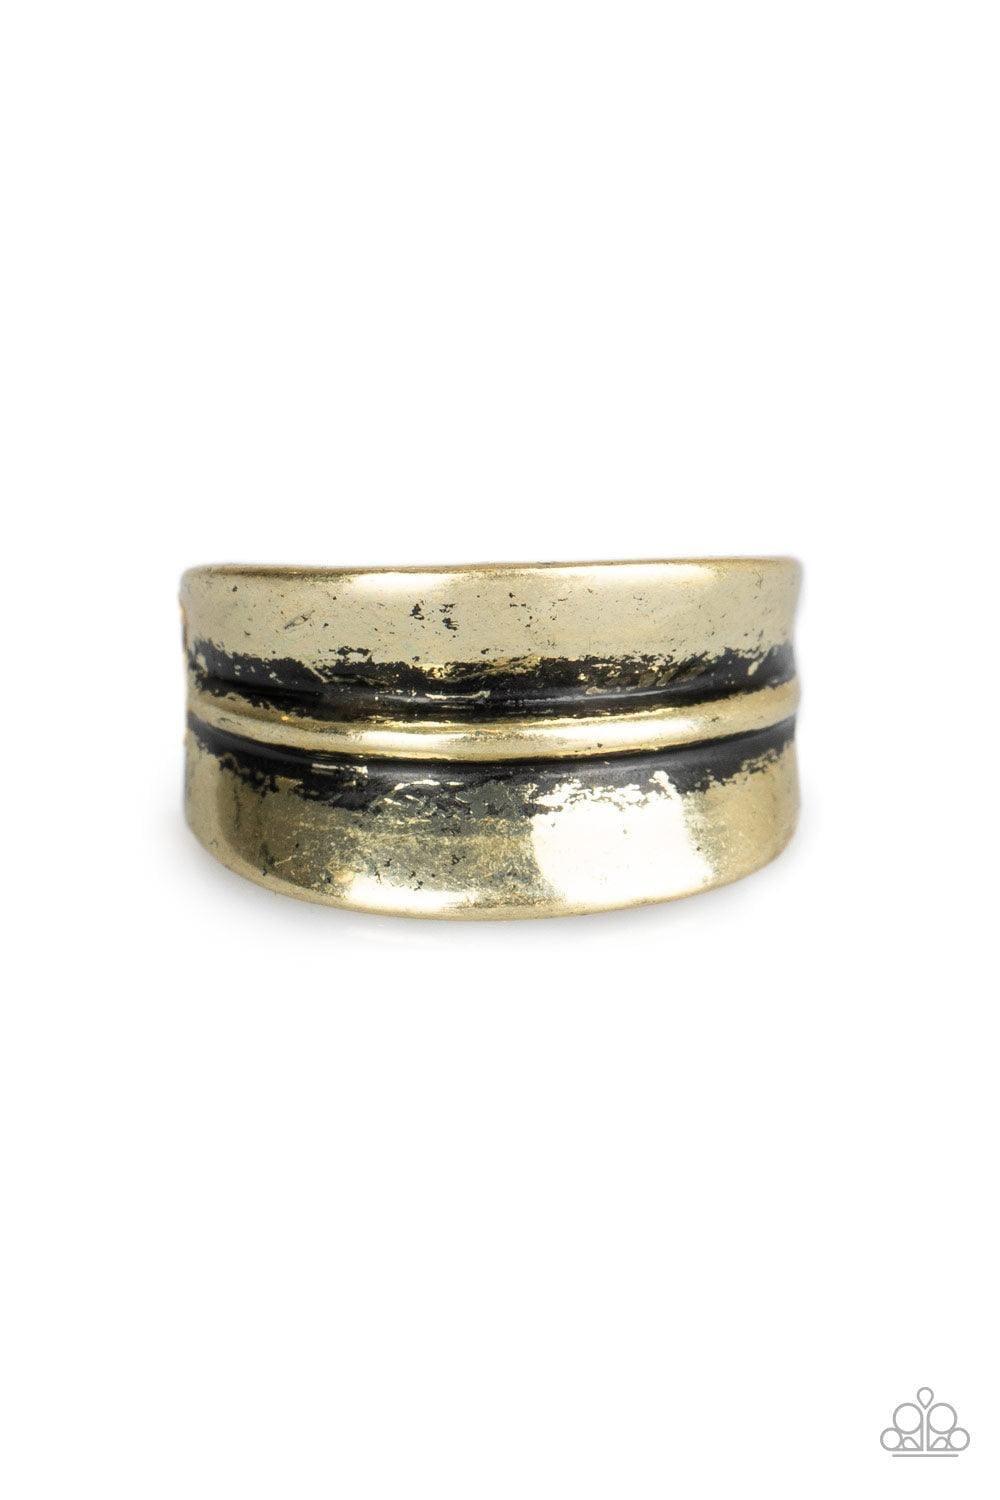 Paparazzi Accessories - Band Together - Brass Ring - Bling by JessieK